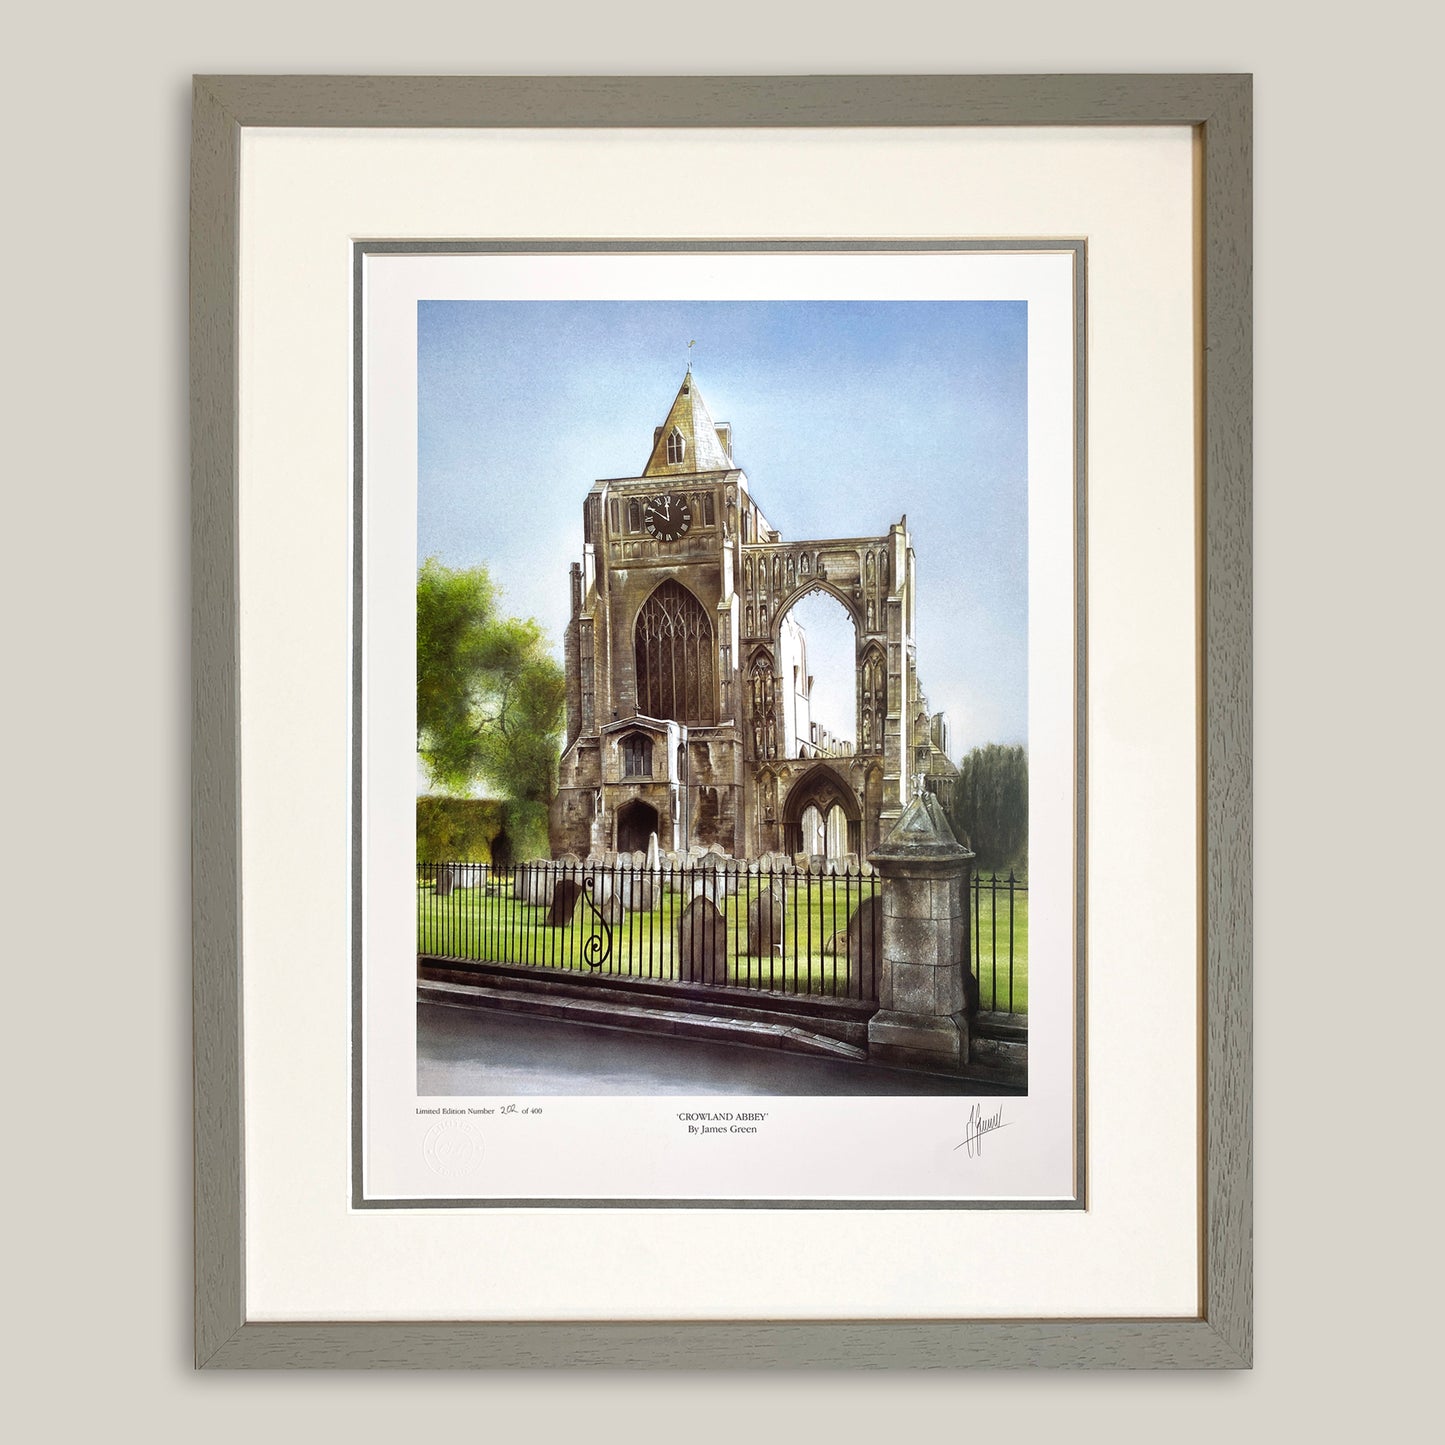 signed print of crowland abbey by James Green